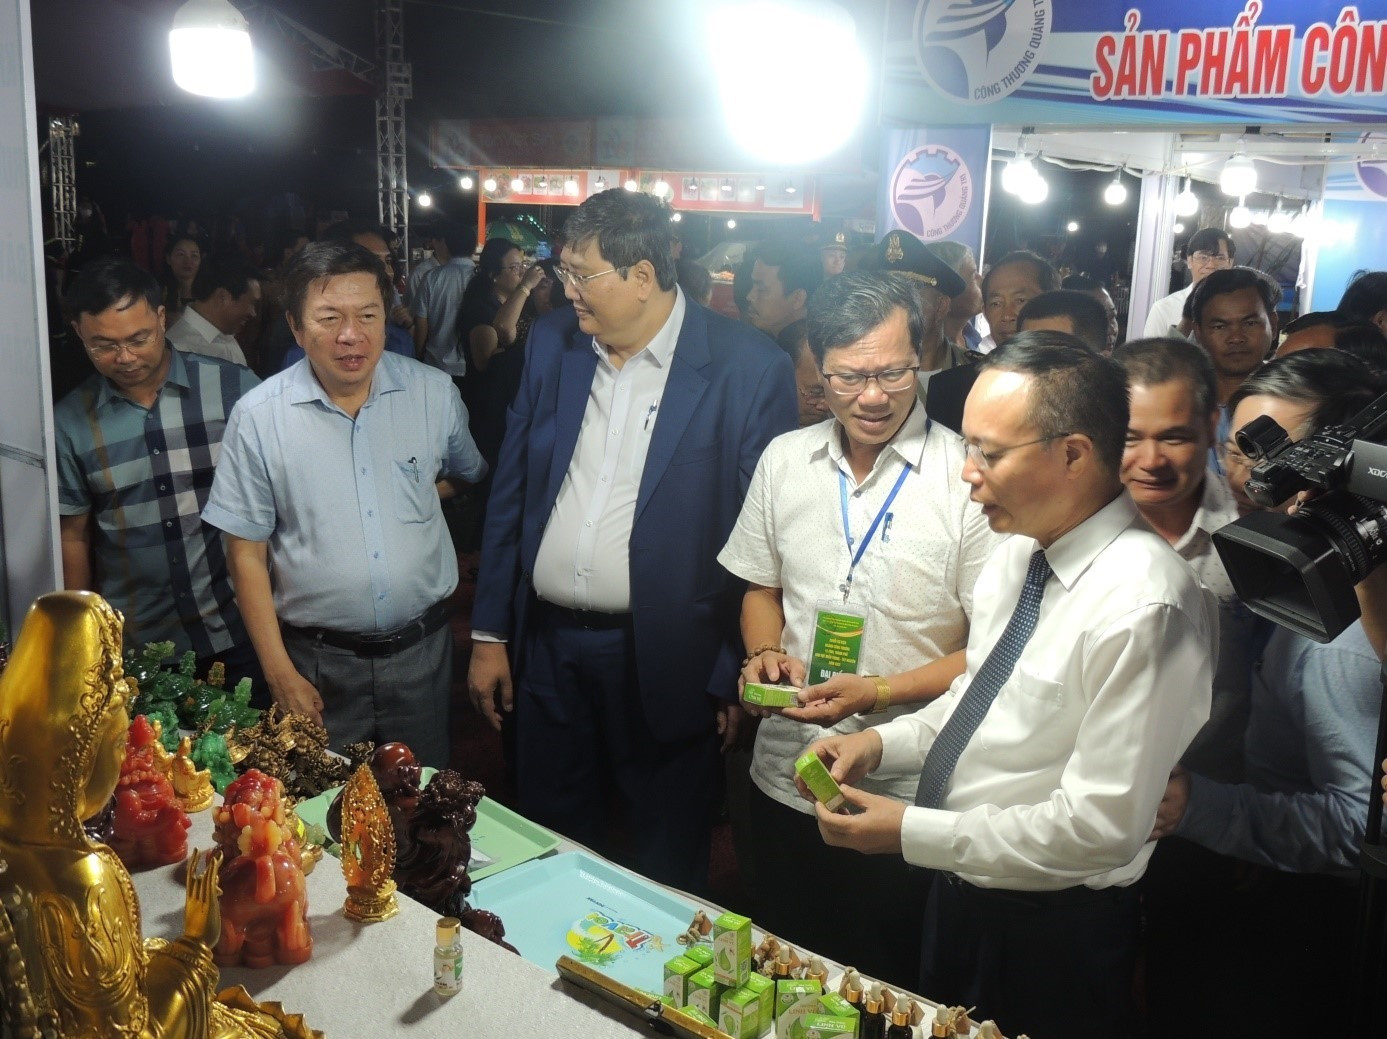 Visitors at a Quang Nam's product booth